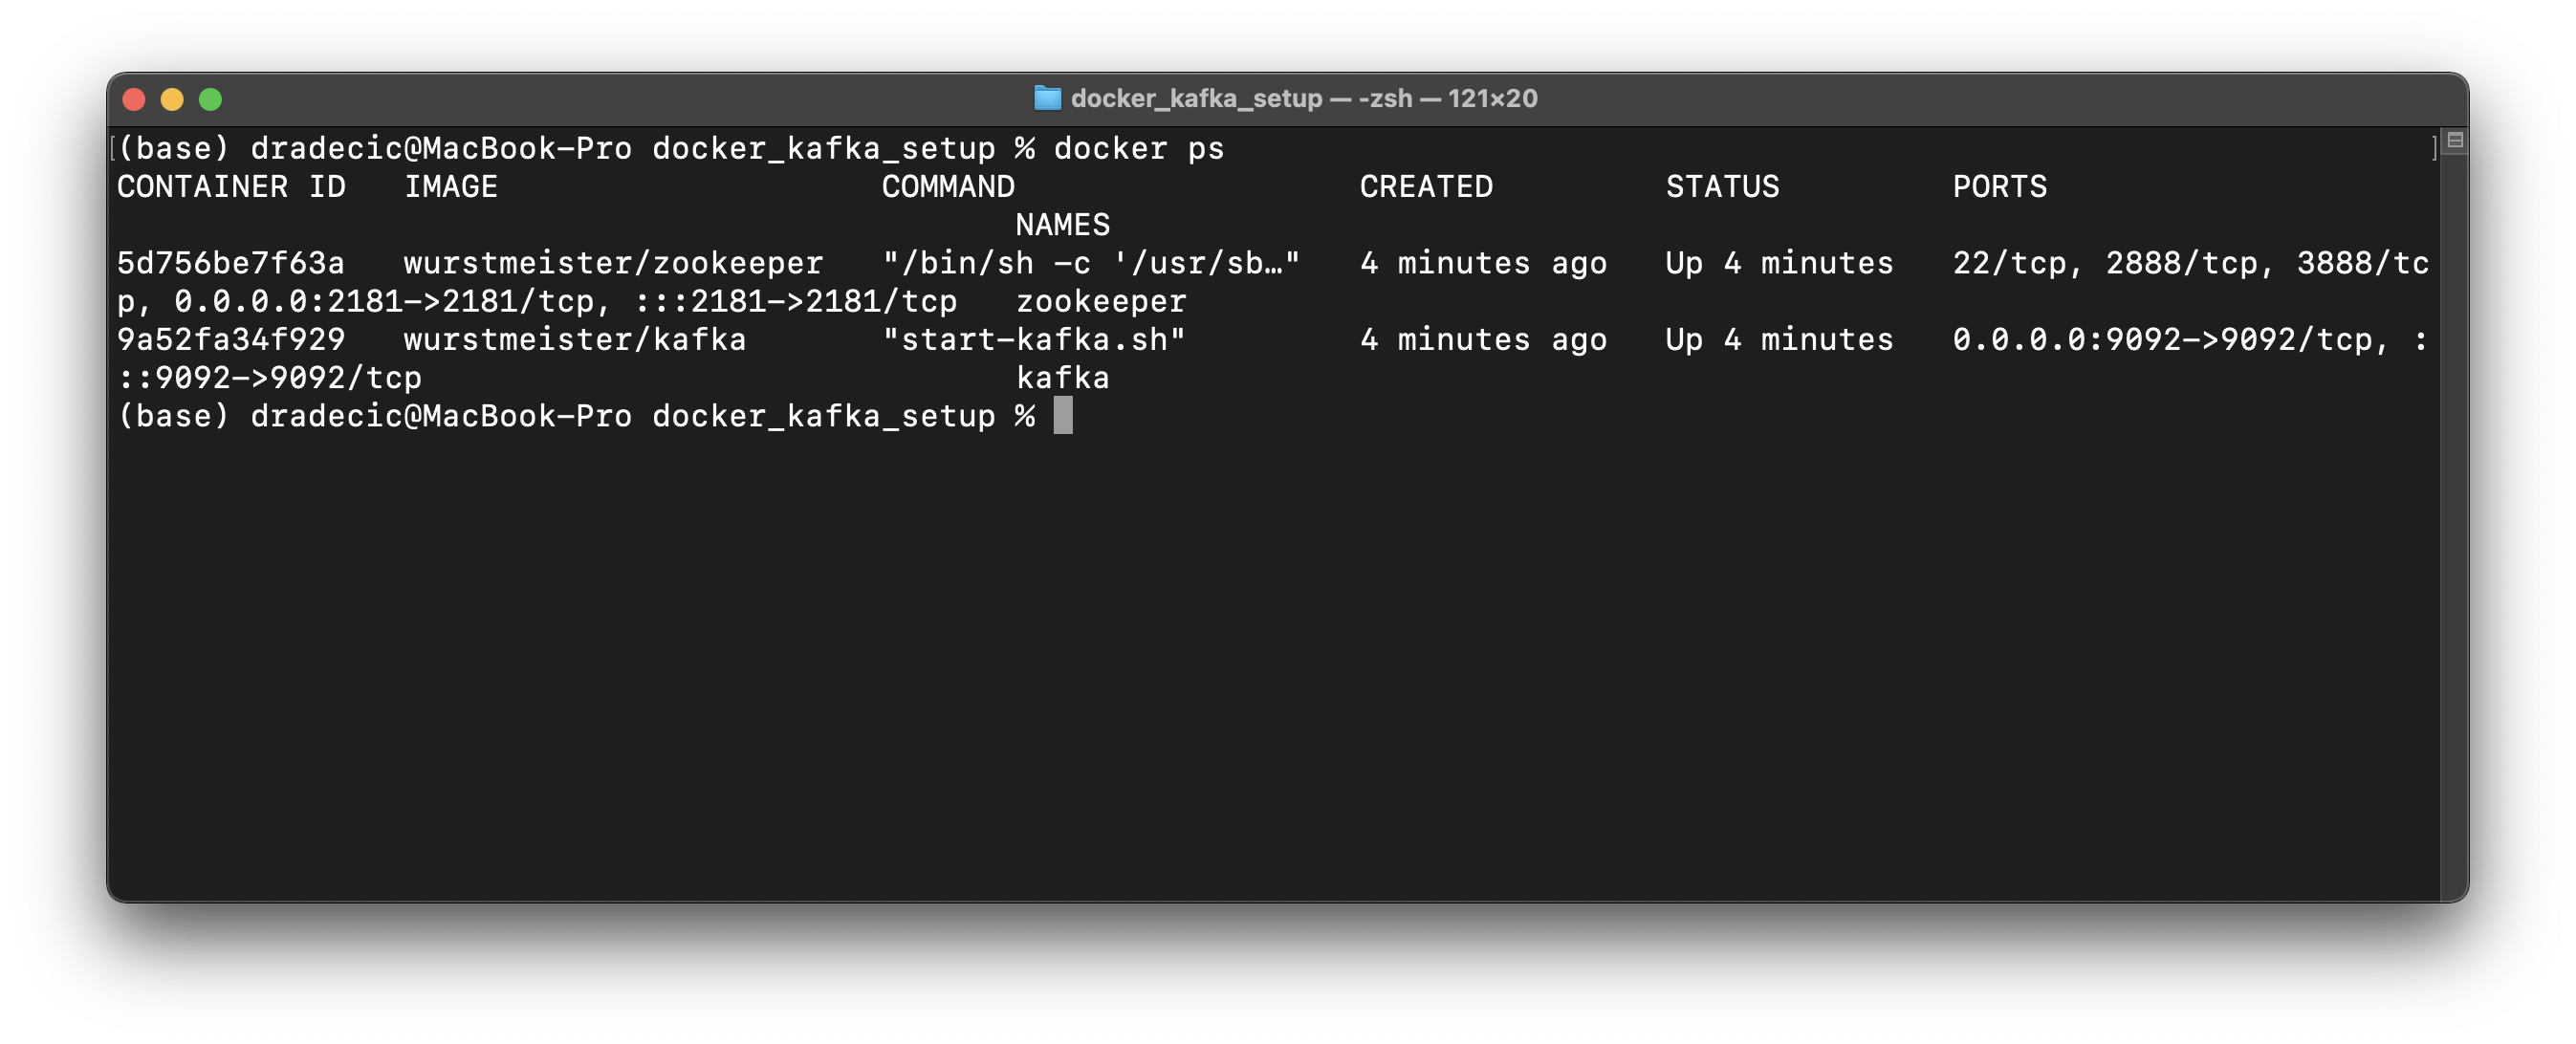 Image 2 — Docker PS command (image by author)